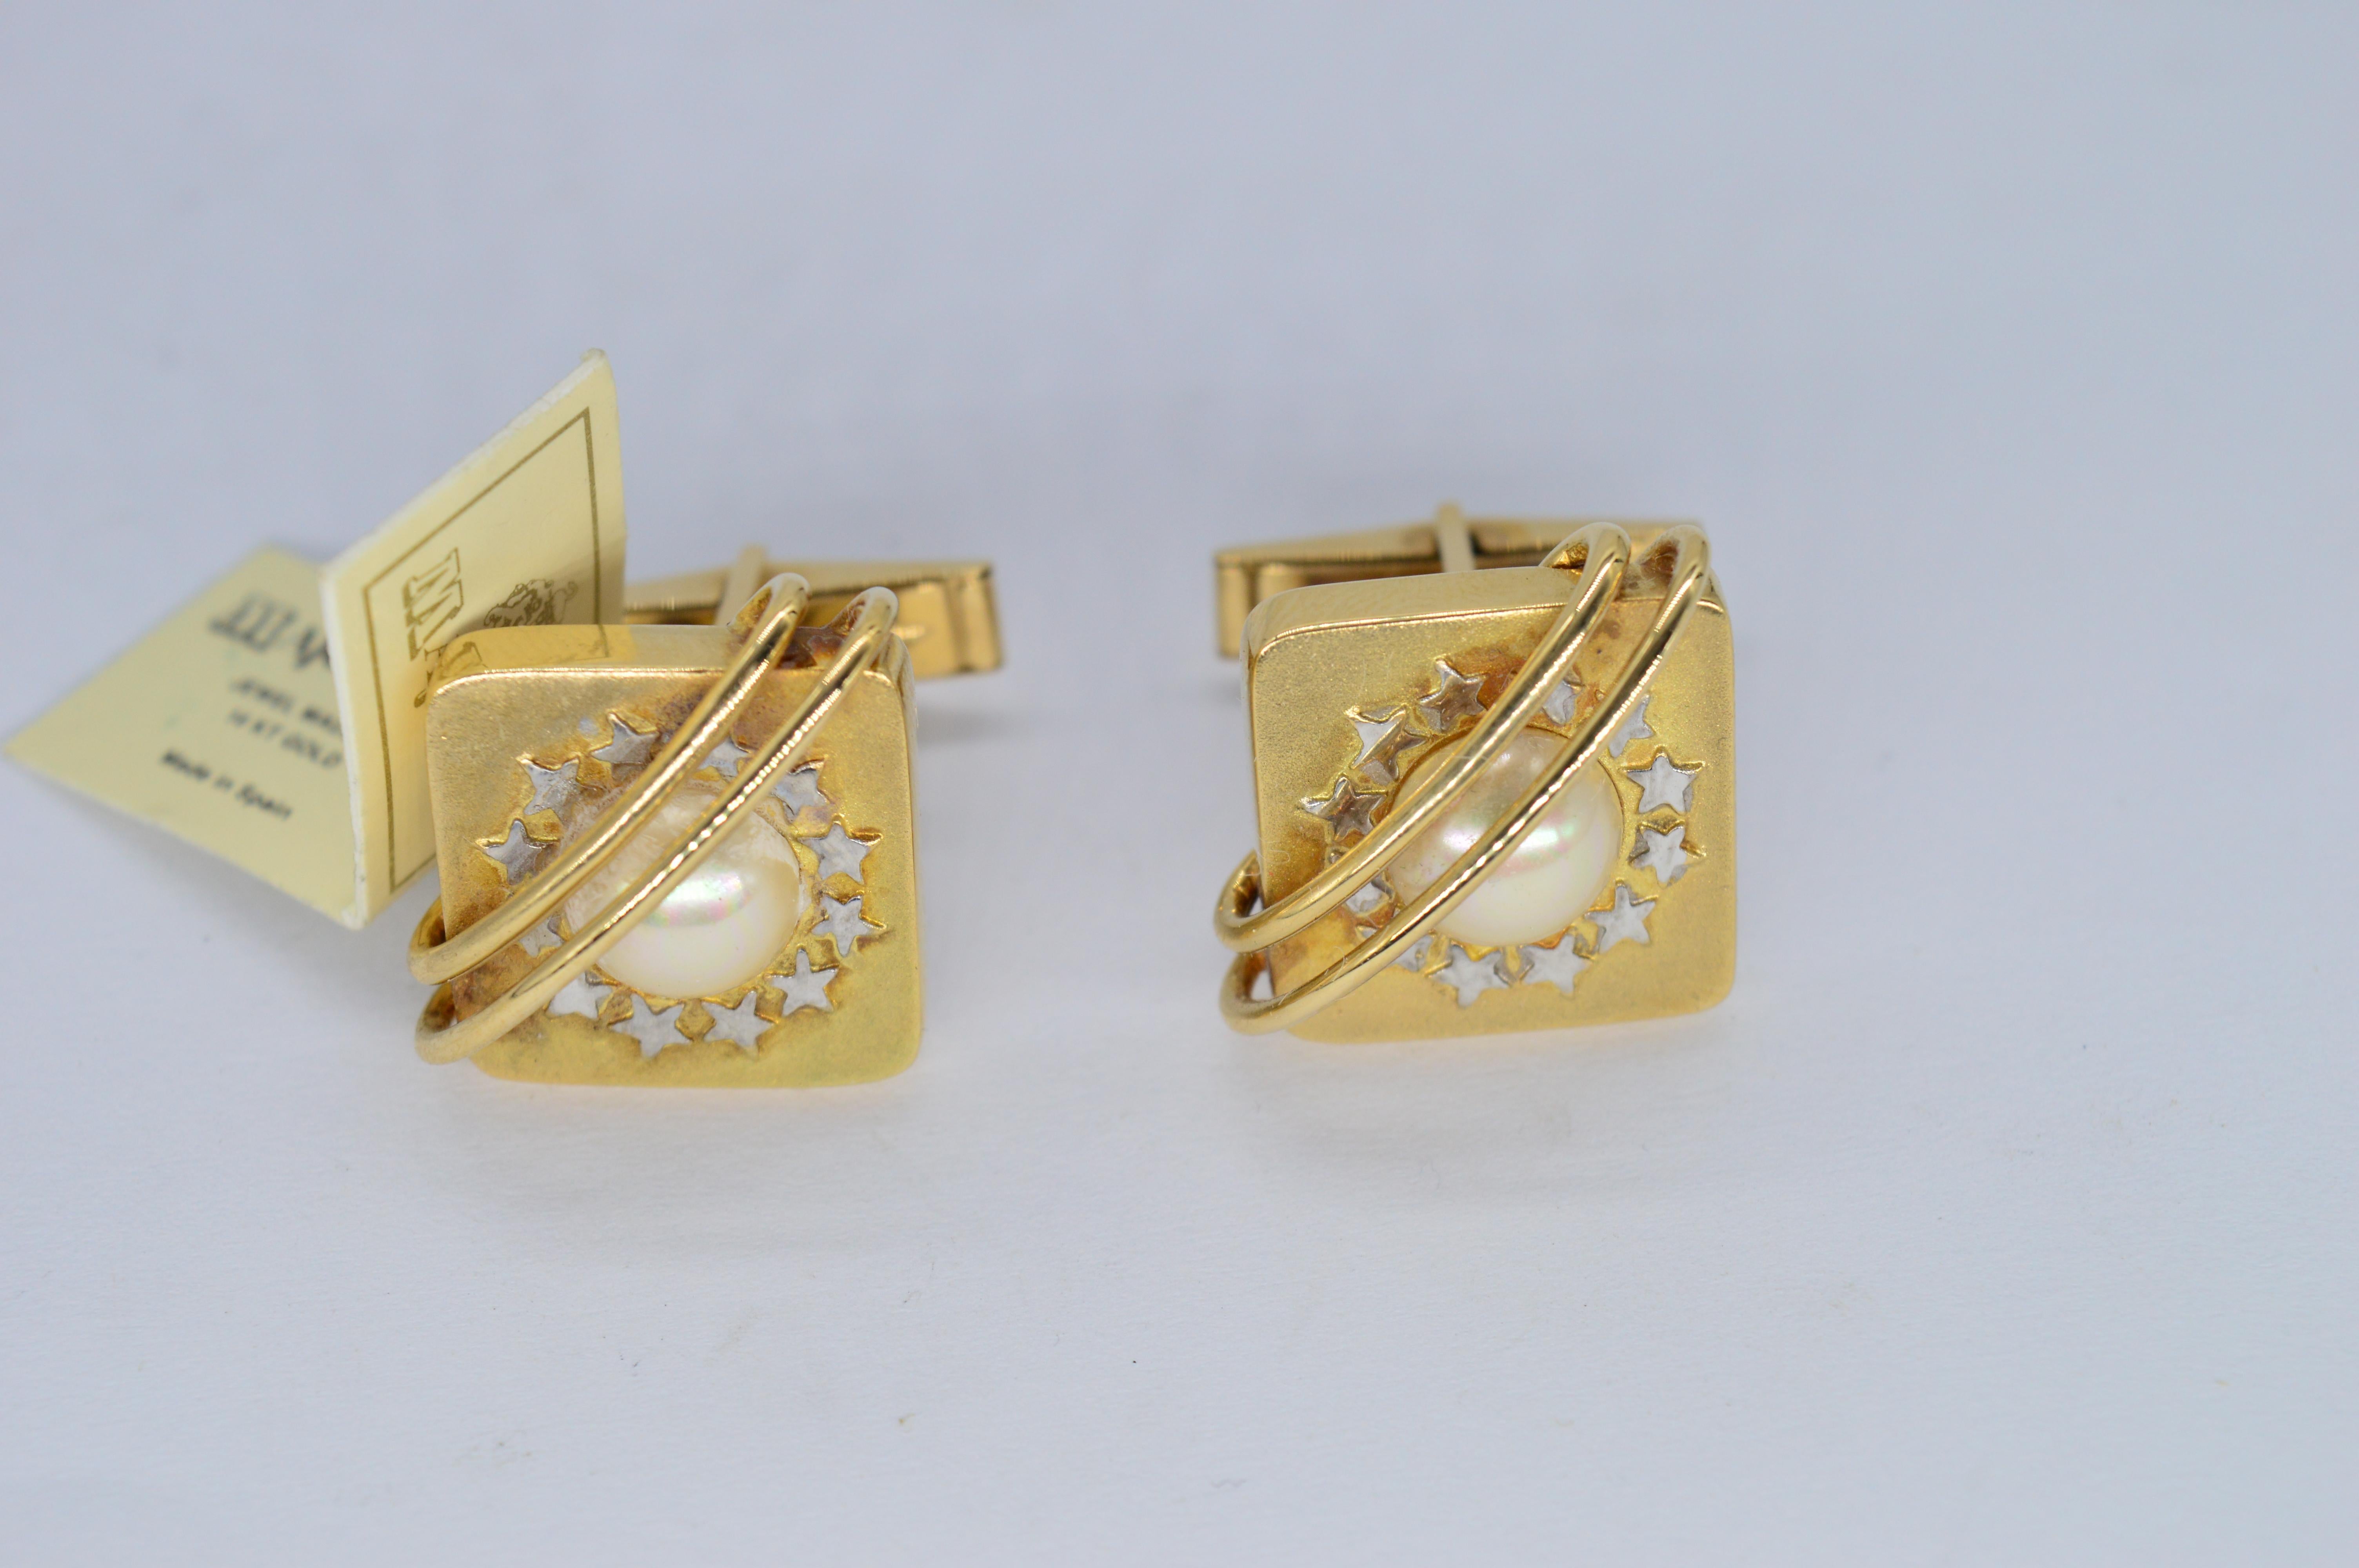 A set of boxed 14ct gold commemorative cufflinks, made to celebrate the 25th anniversary of the PGA tour in Europe. Crafted from 14ct yellow gold and large lustrous pearls.

13.43g

We have sold to the set of Hit shows like Peaky Blinders and